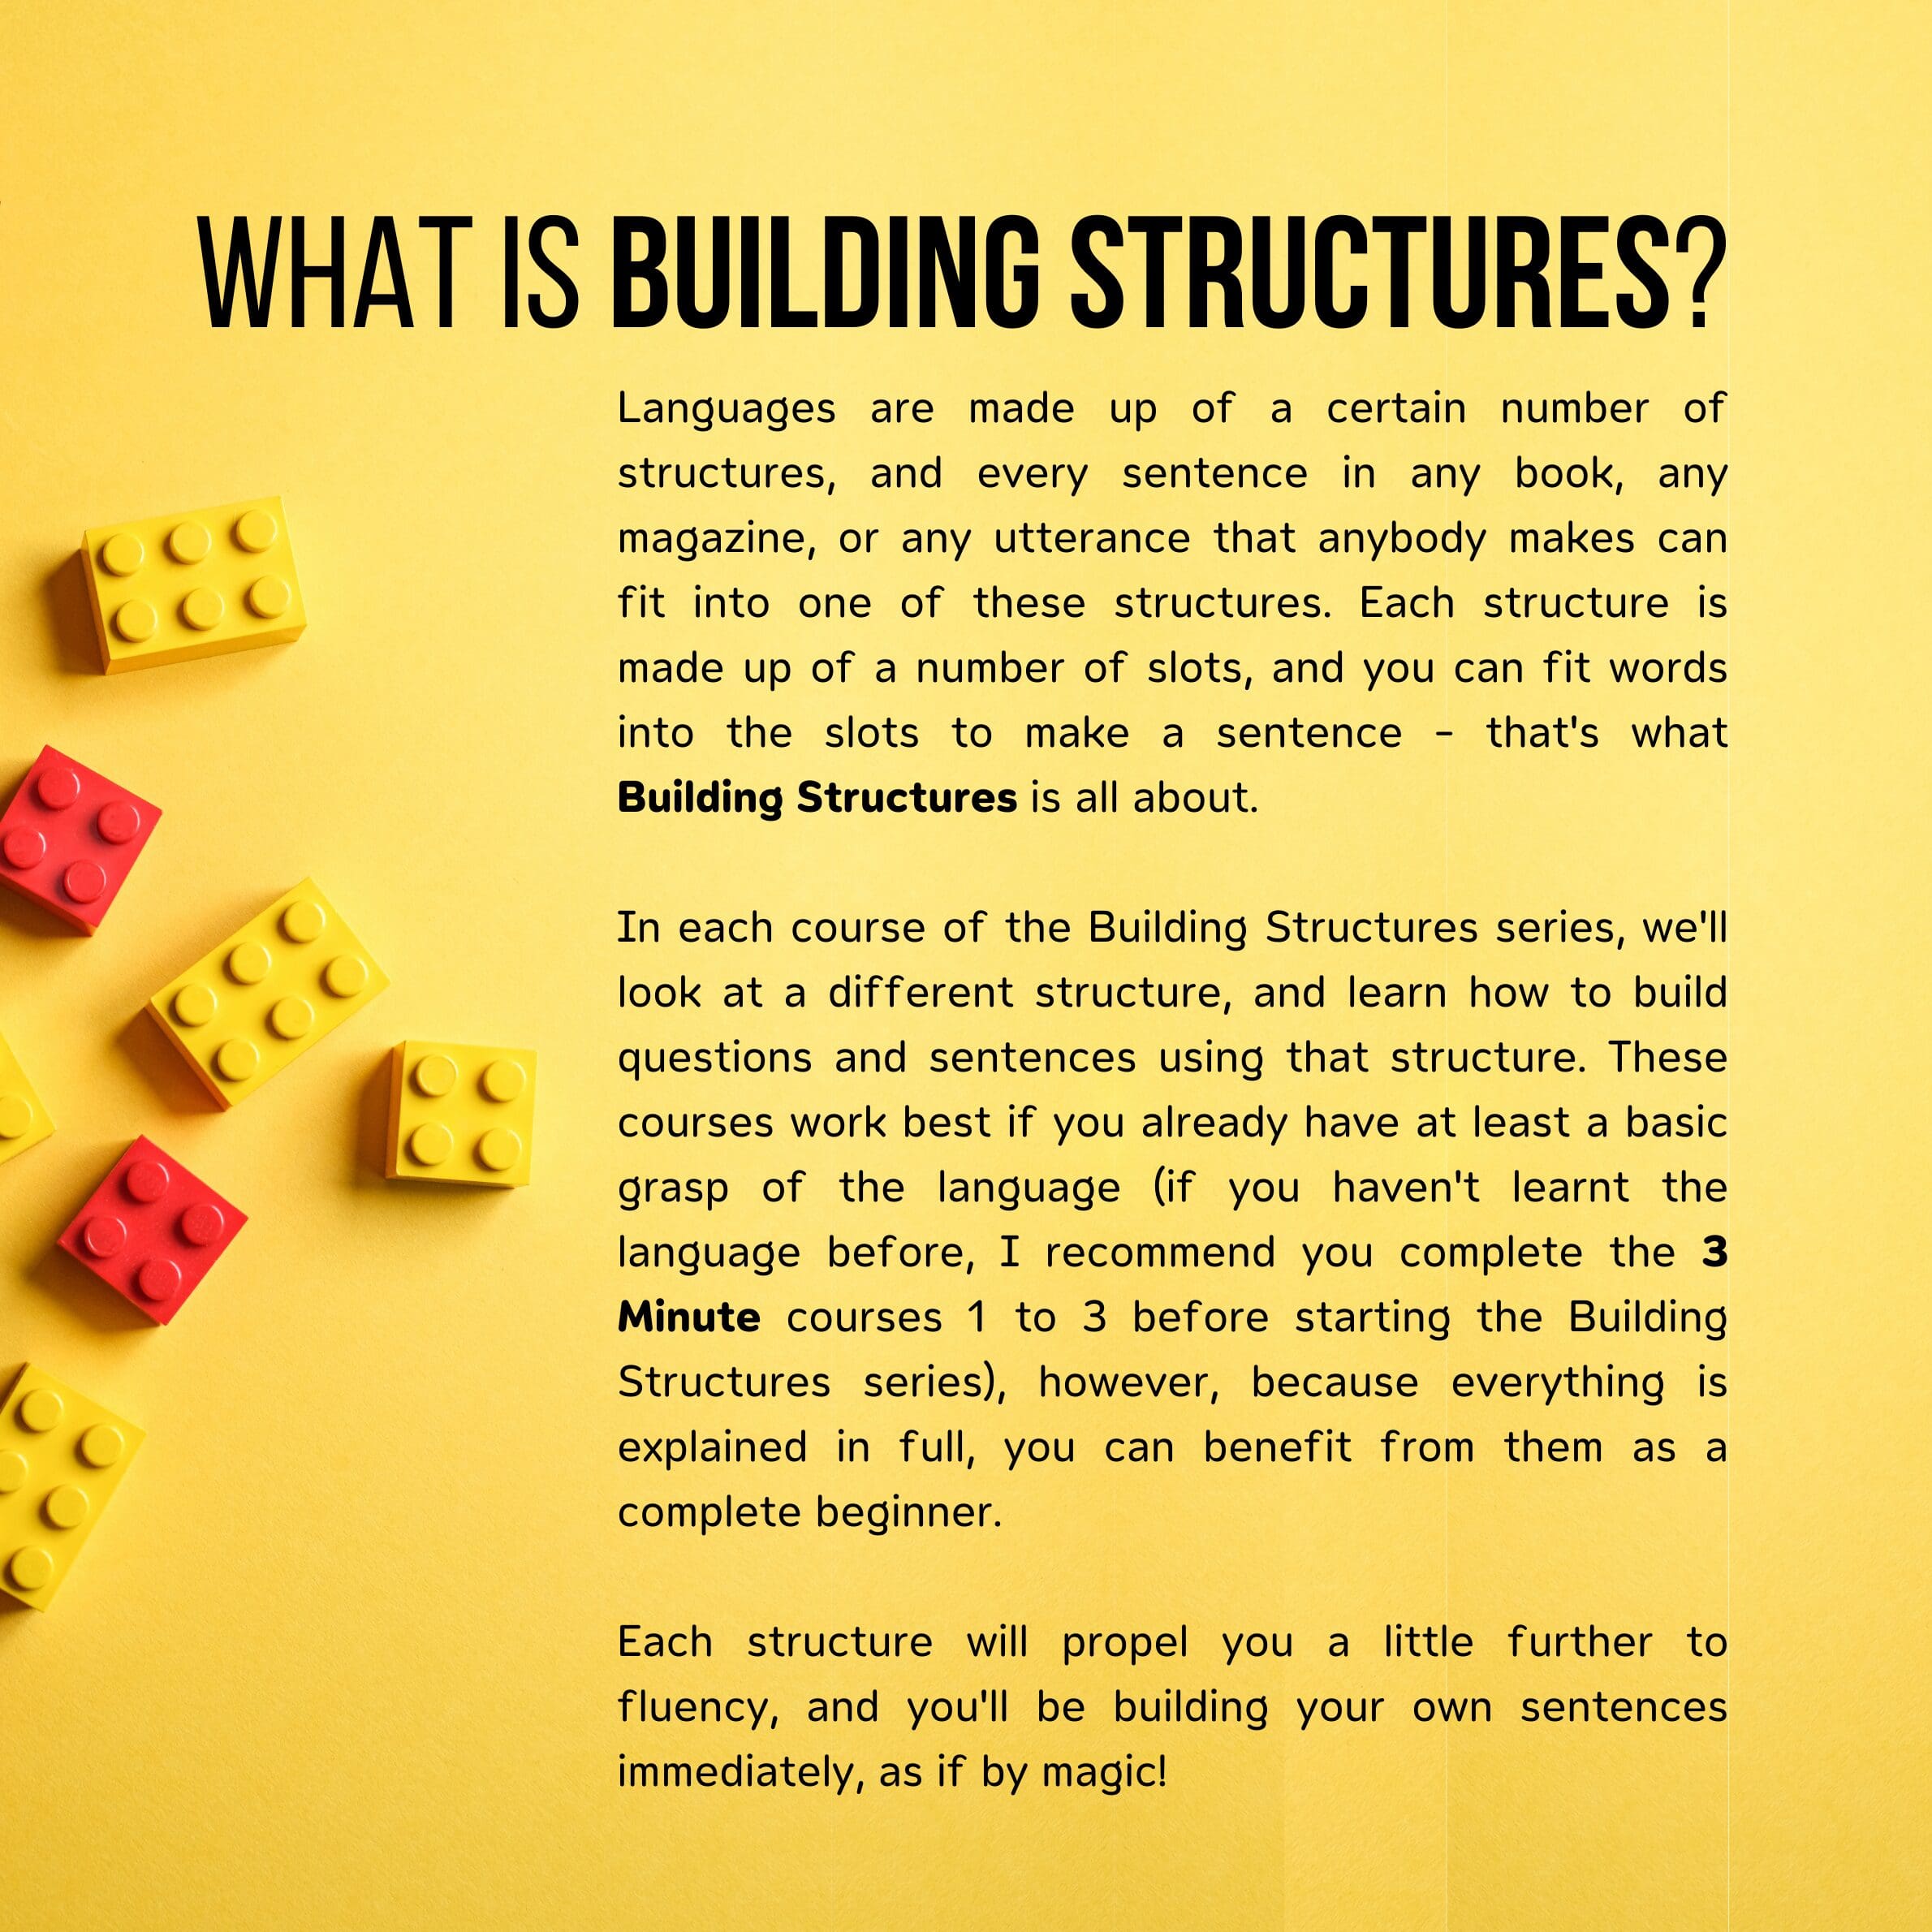 What is Building Structures?